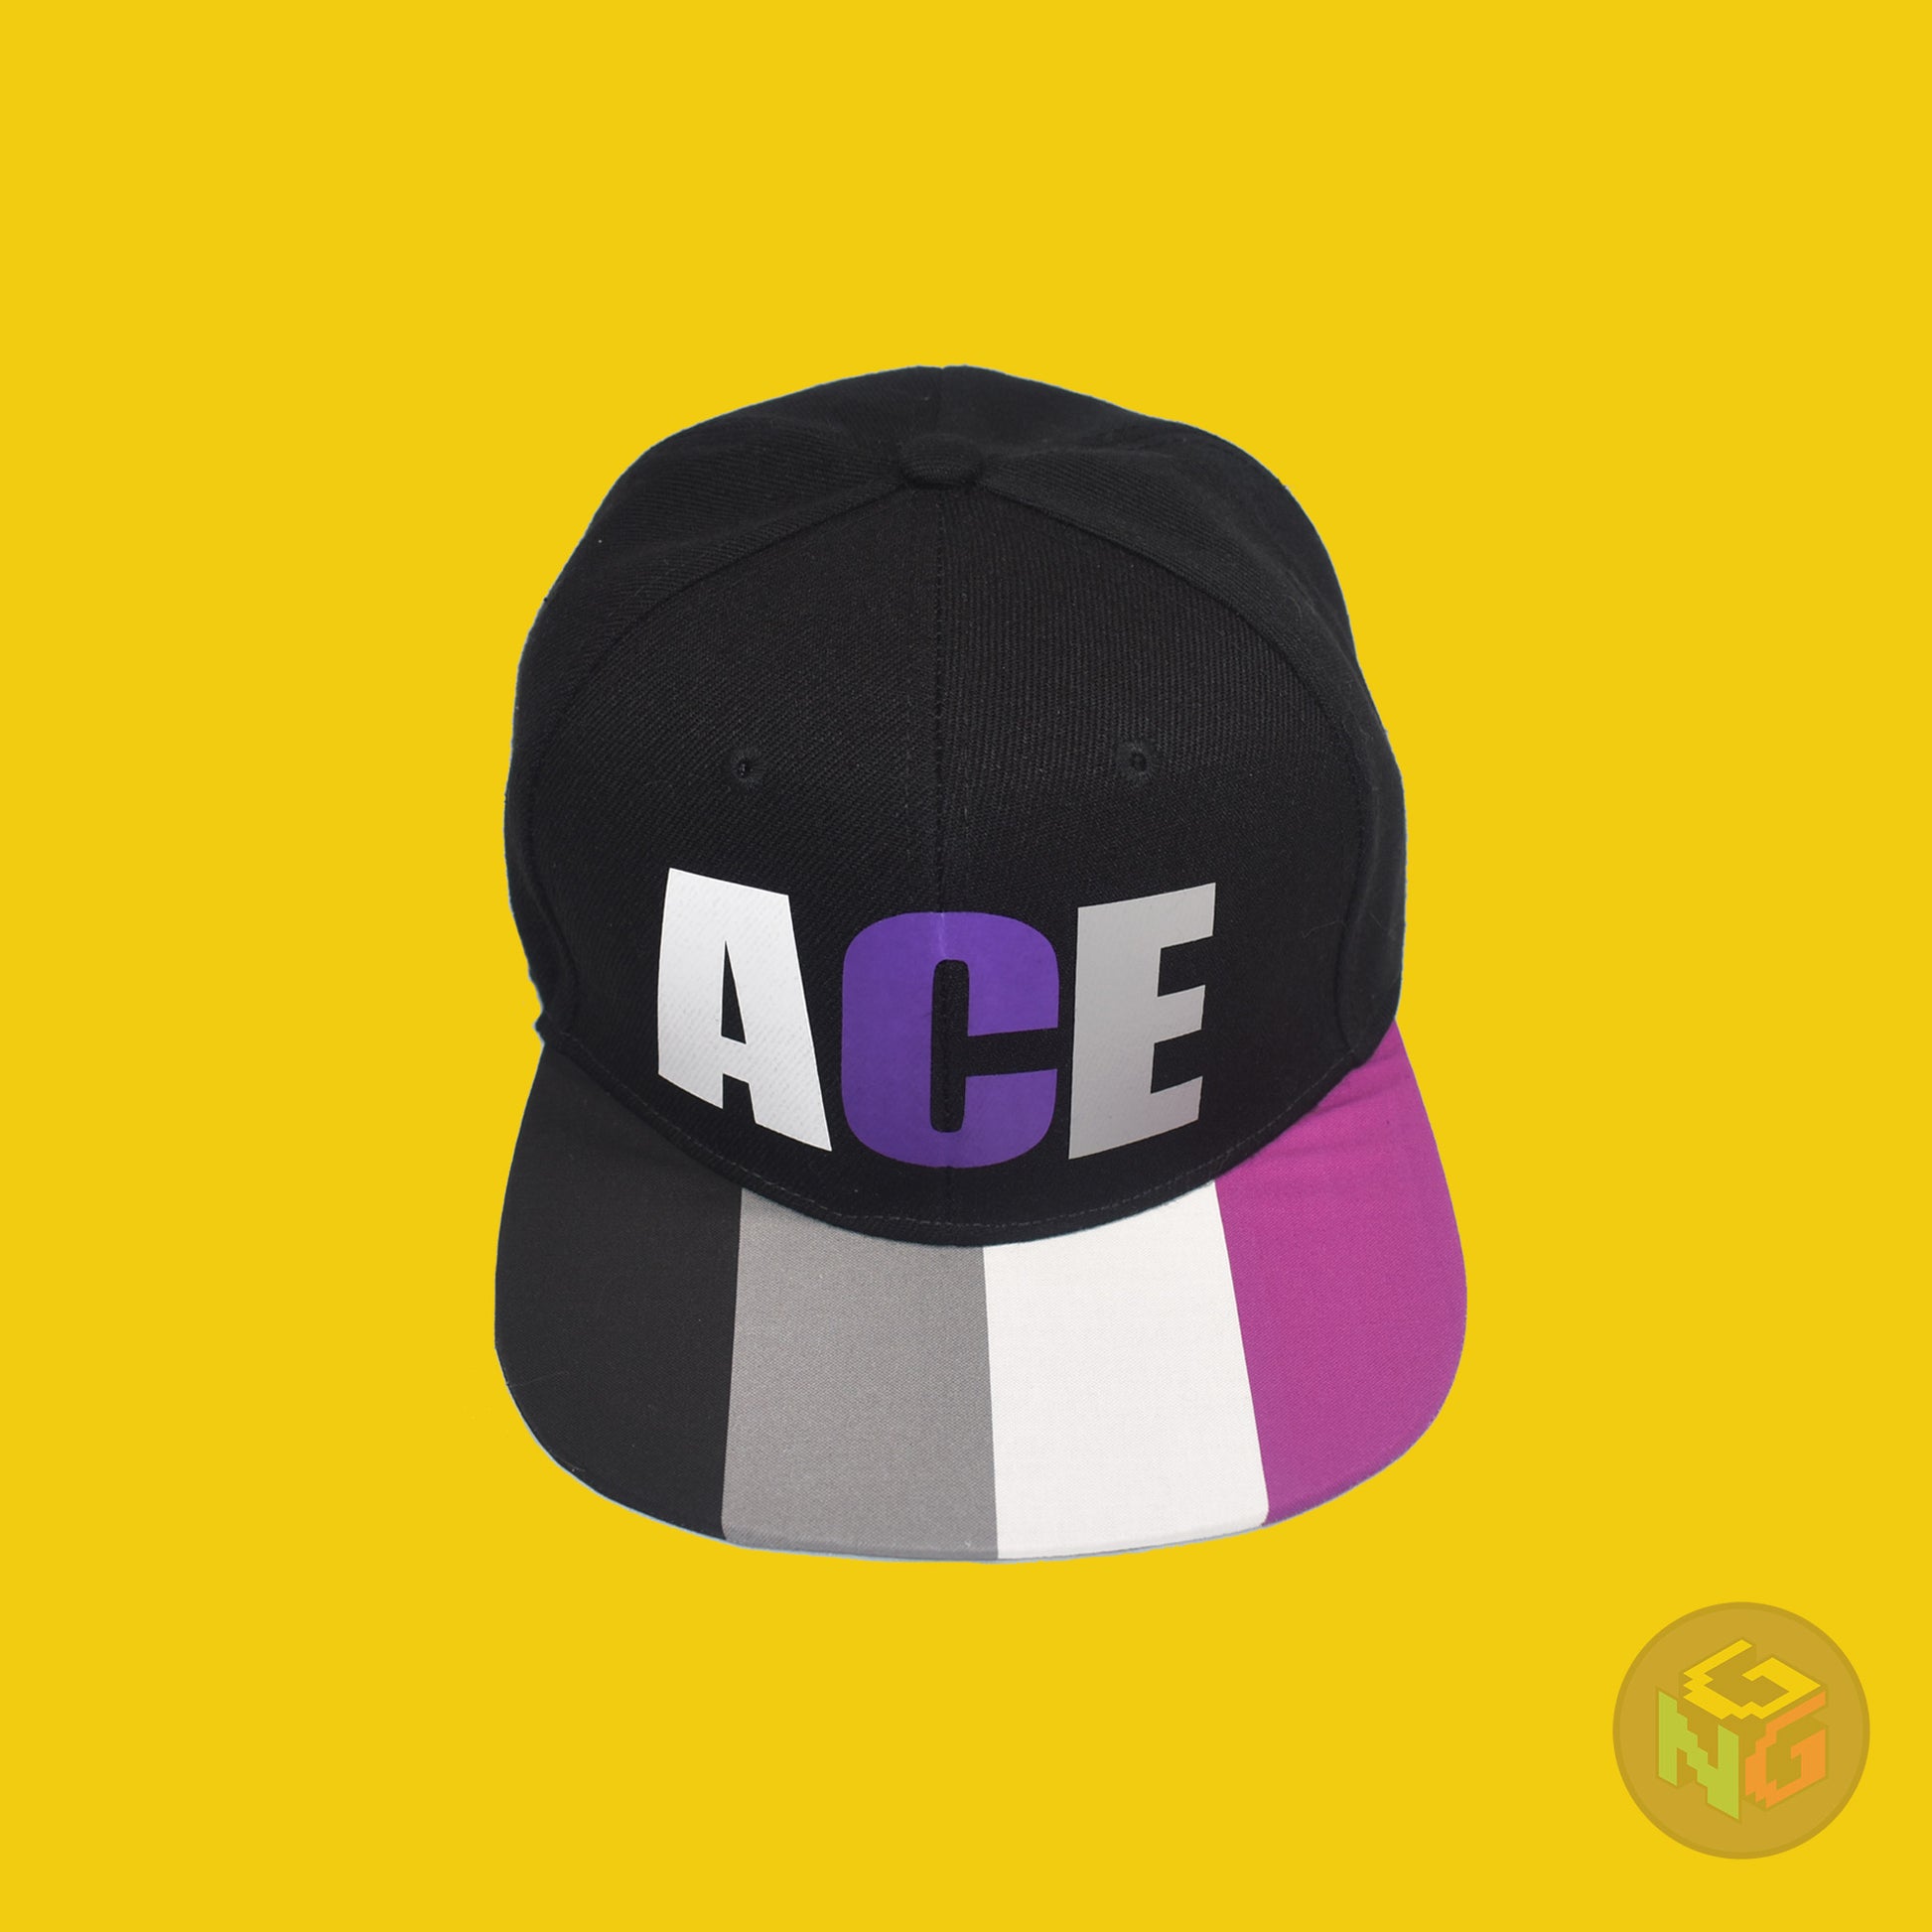 Black flat bill snapback hat. The brim has the asexual pride flag on both sides and the front of the hat has the word “ACE” in white, purple, and grey. Front top view